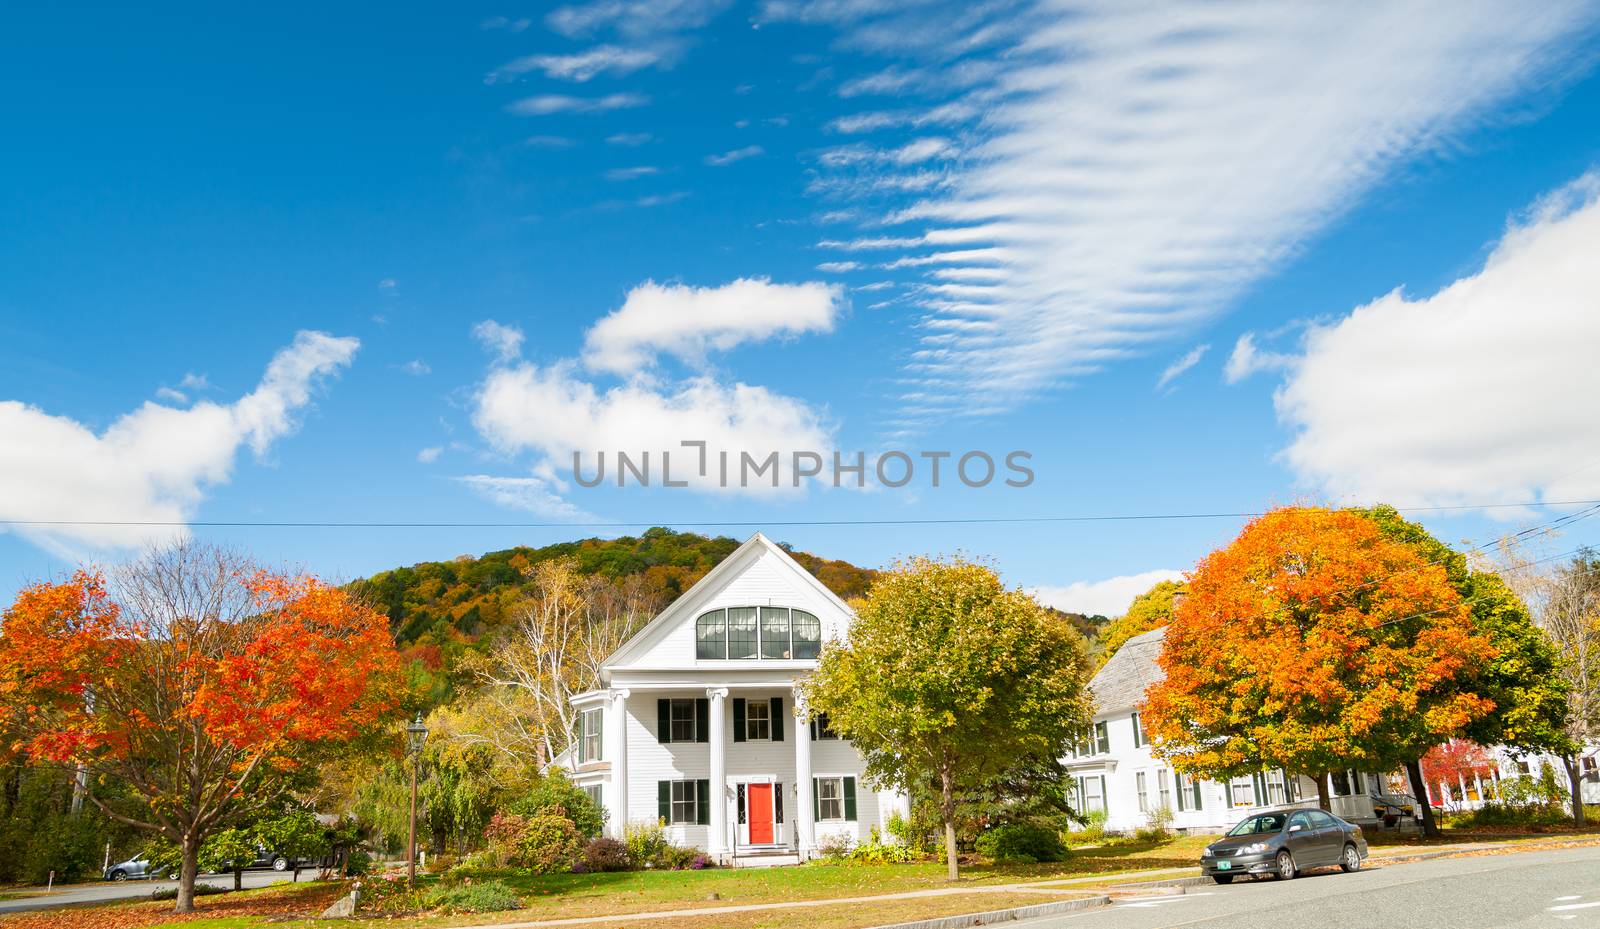 Street scene with traditional American white wooden residental architecture surrounded by brightly colored fall foliage and under blue sky.Newfane, Vermont, USA.